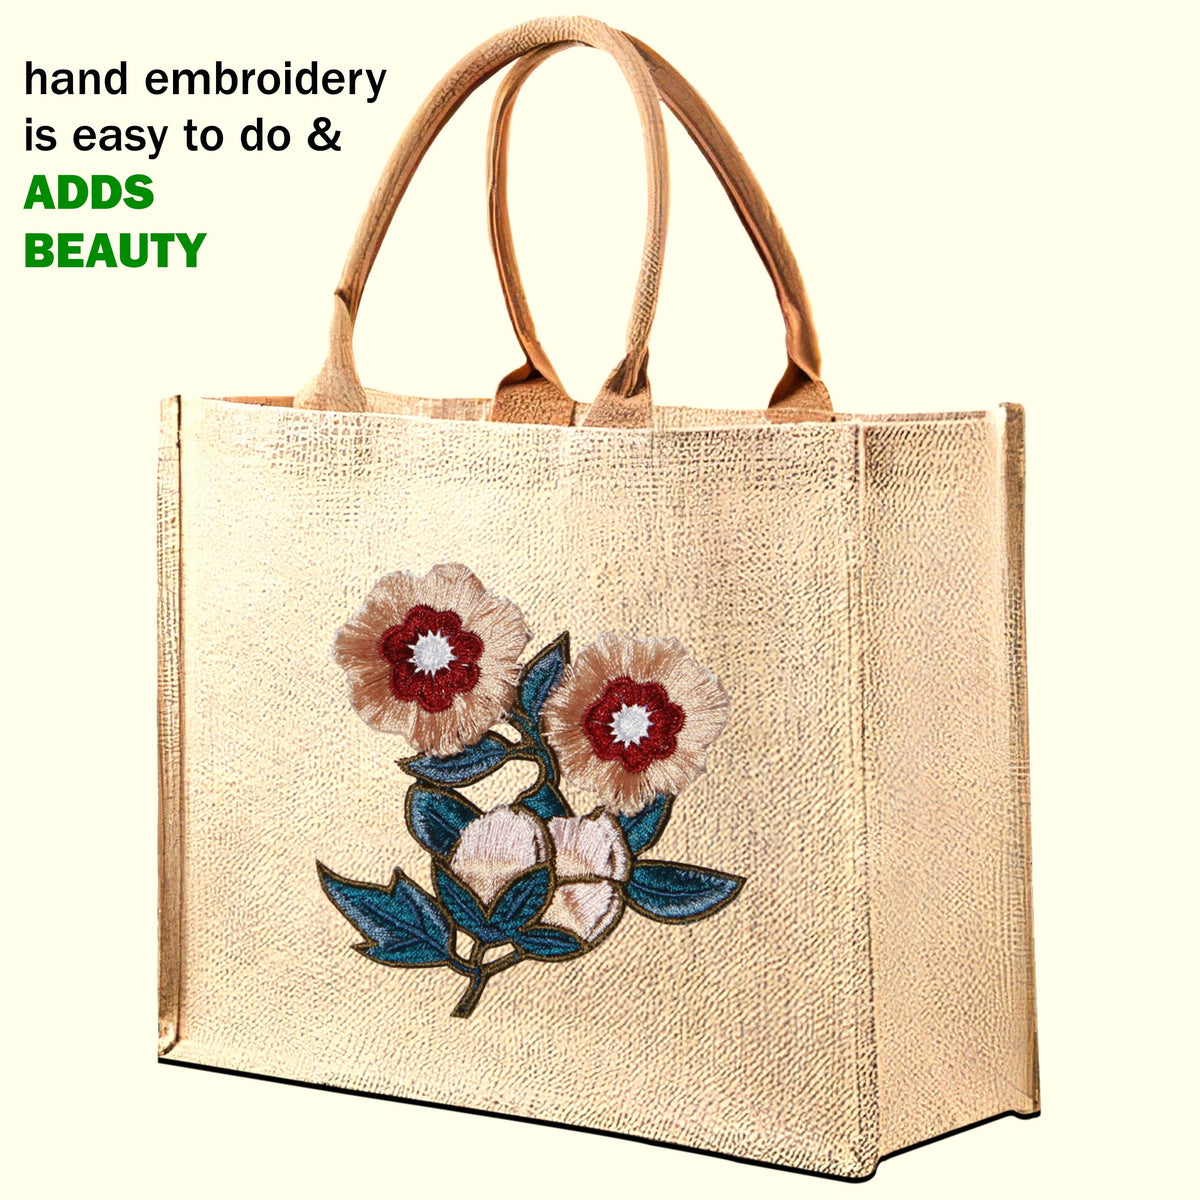 A set of Reusable jute tote bags, each with laminated interiors and handles